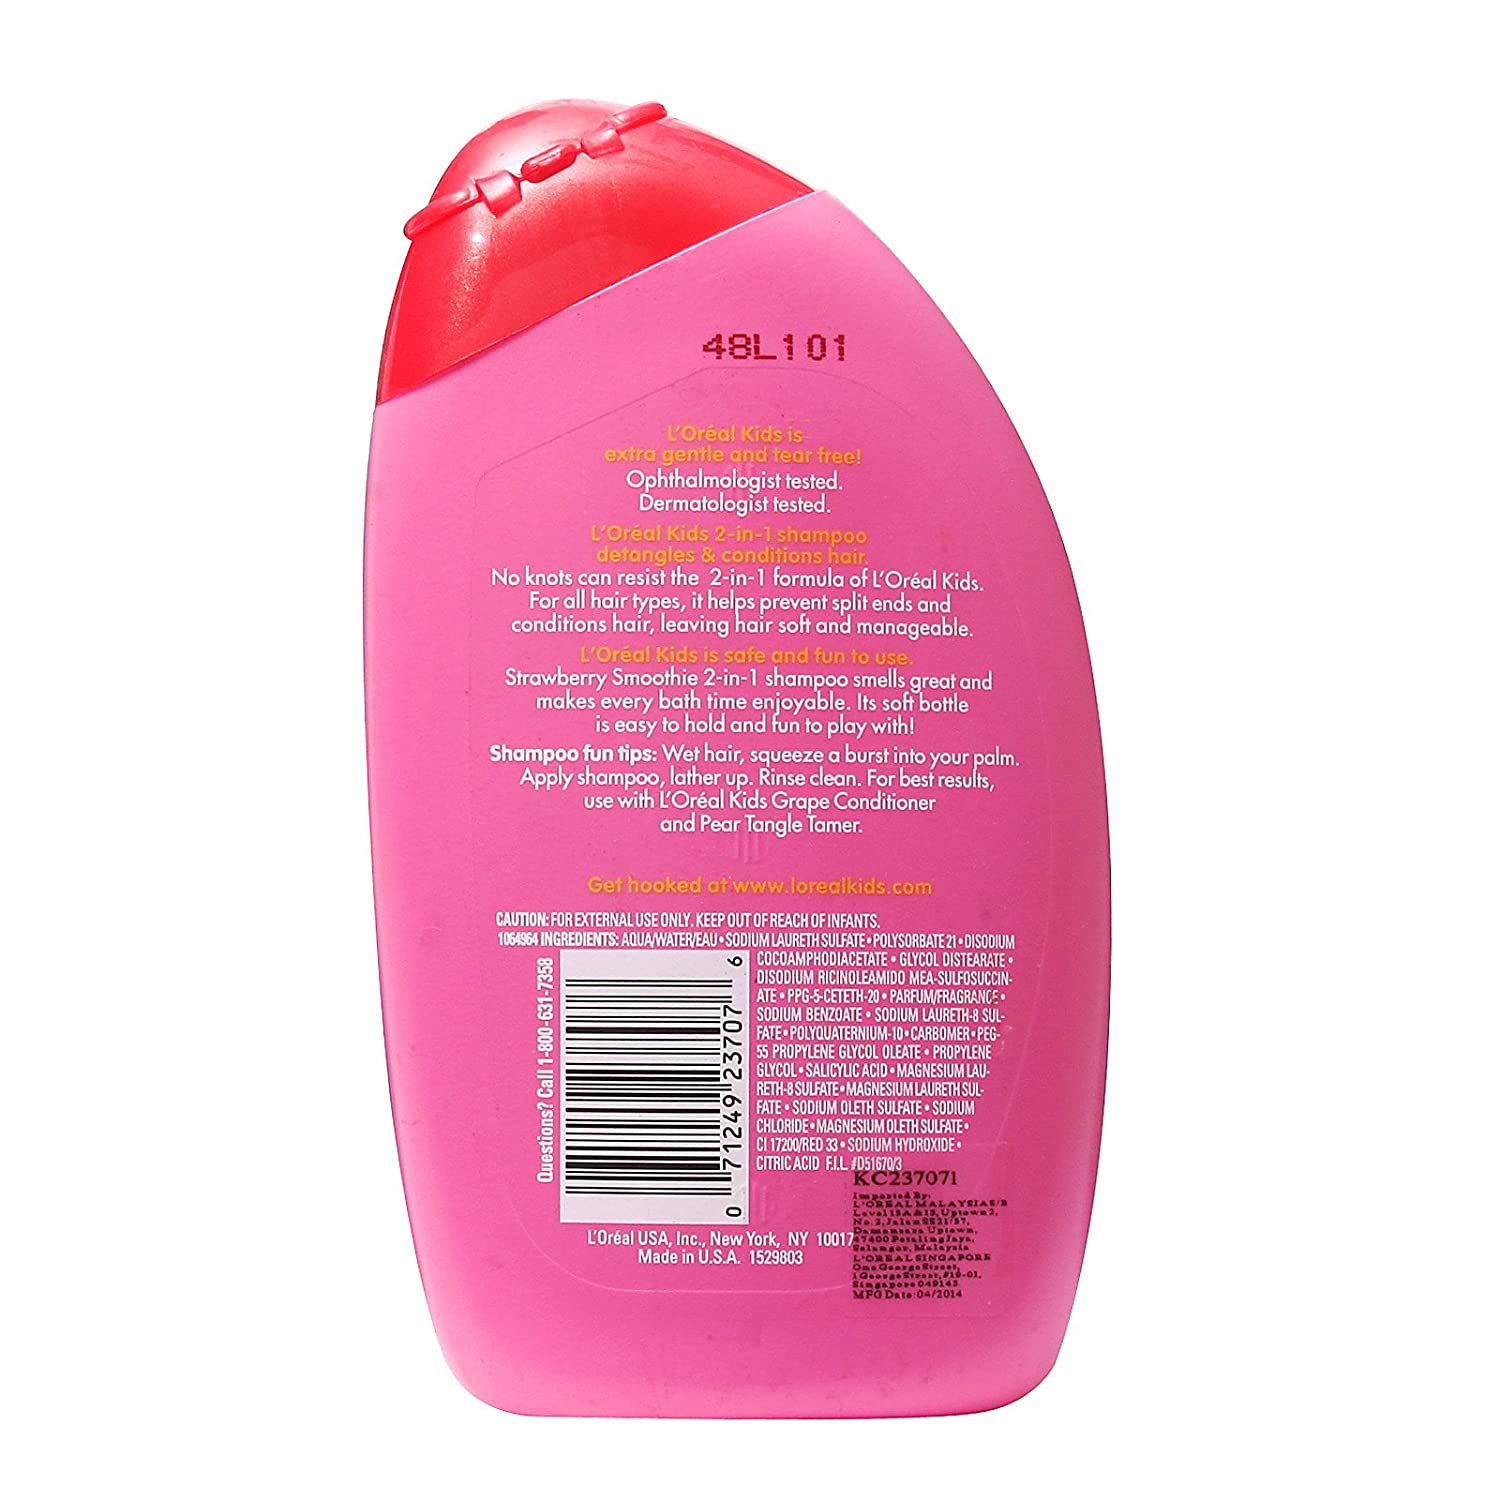 Loreal Kids 2in1 Shampoo Extra Gentle Strawberry Smoothie 265ml Blue - Baby Moo